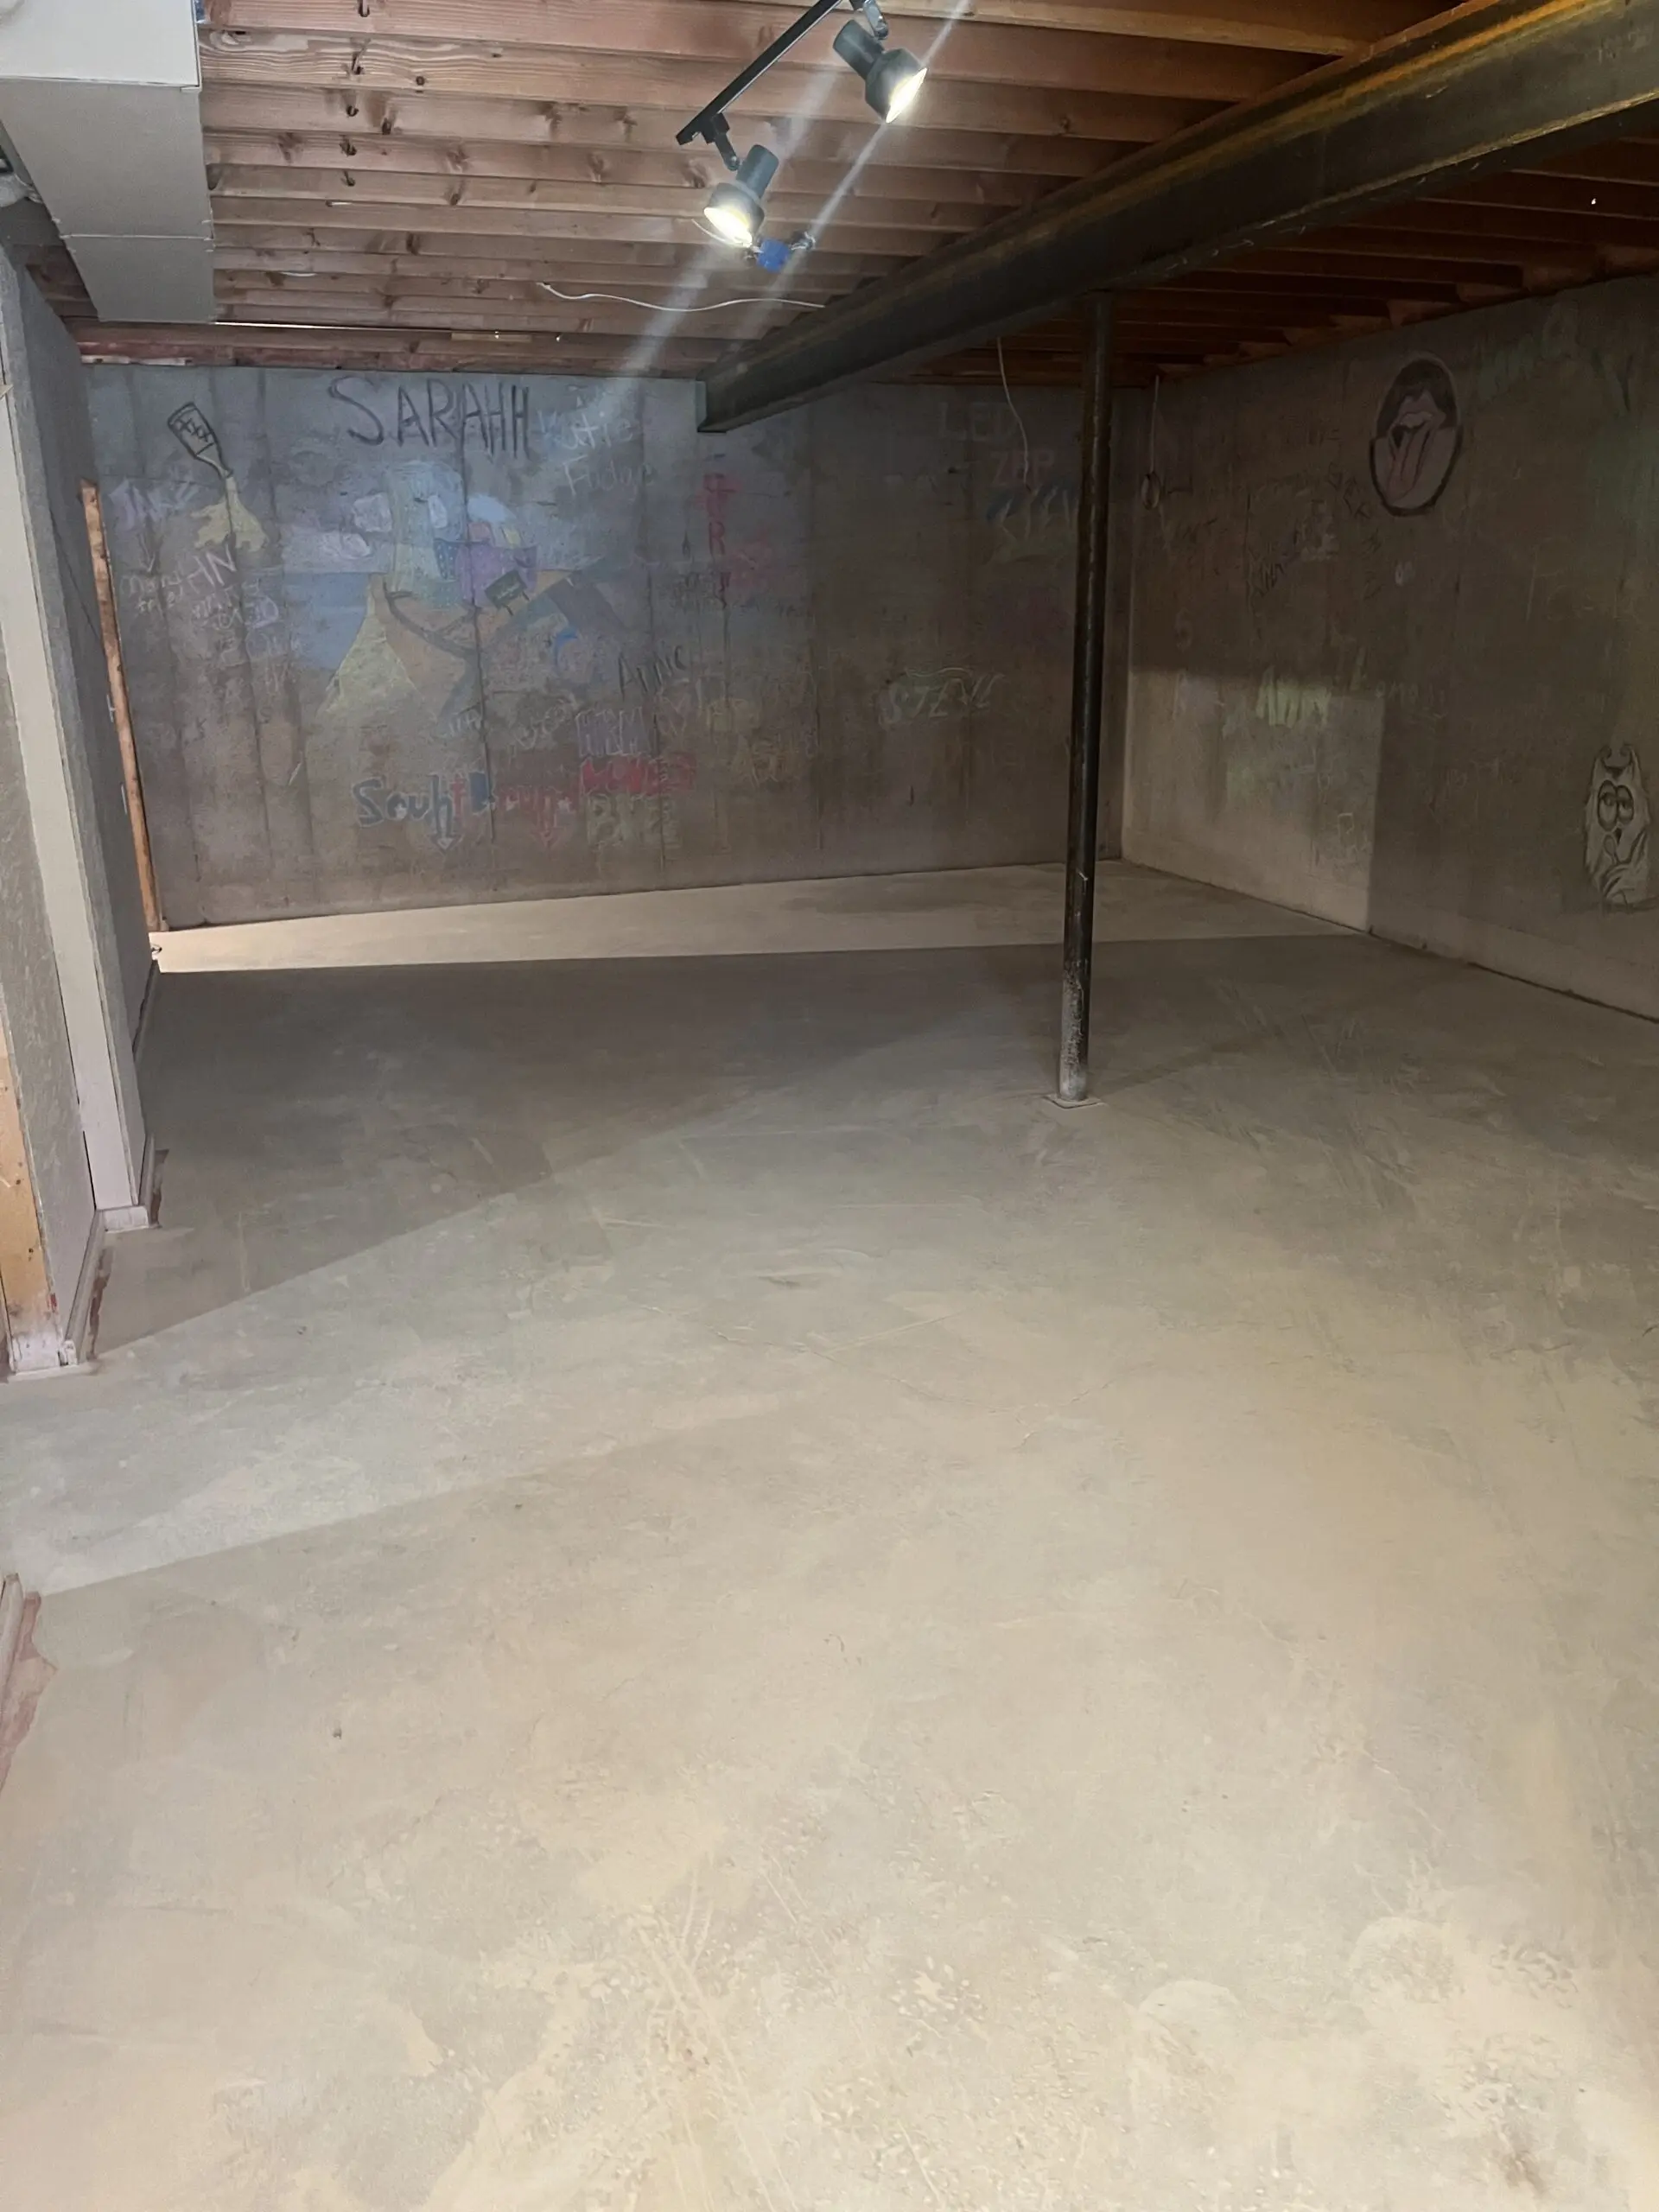 Basement floor after grinding process, preparing for staining